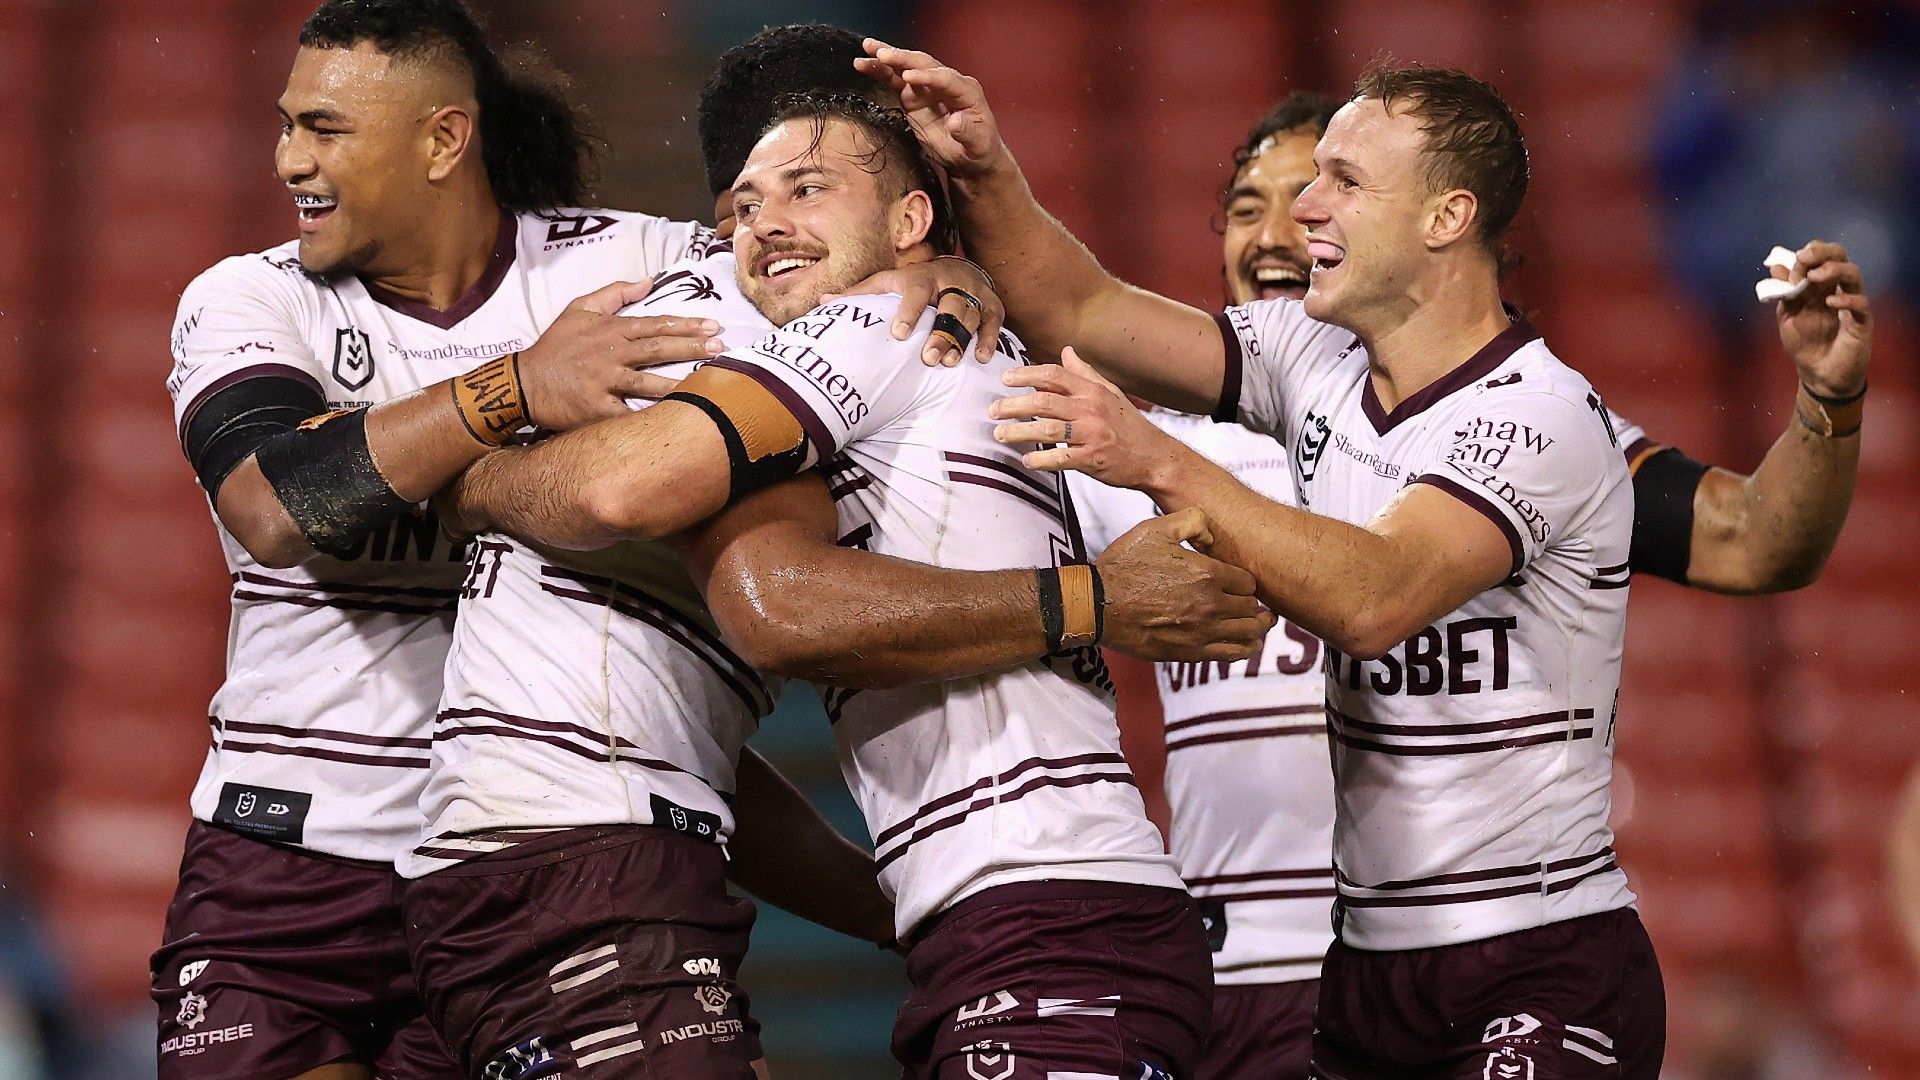 No Turbo, no worries as Manly smashes Newcastle in slippery conditions